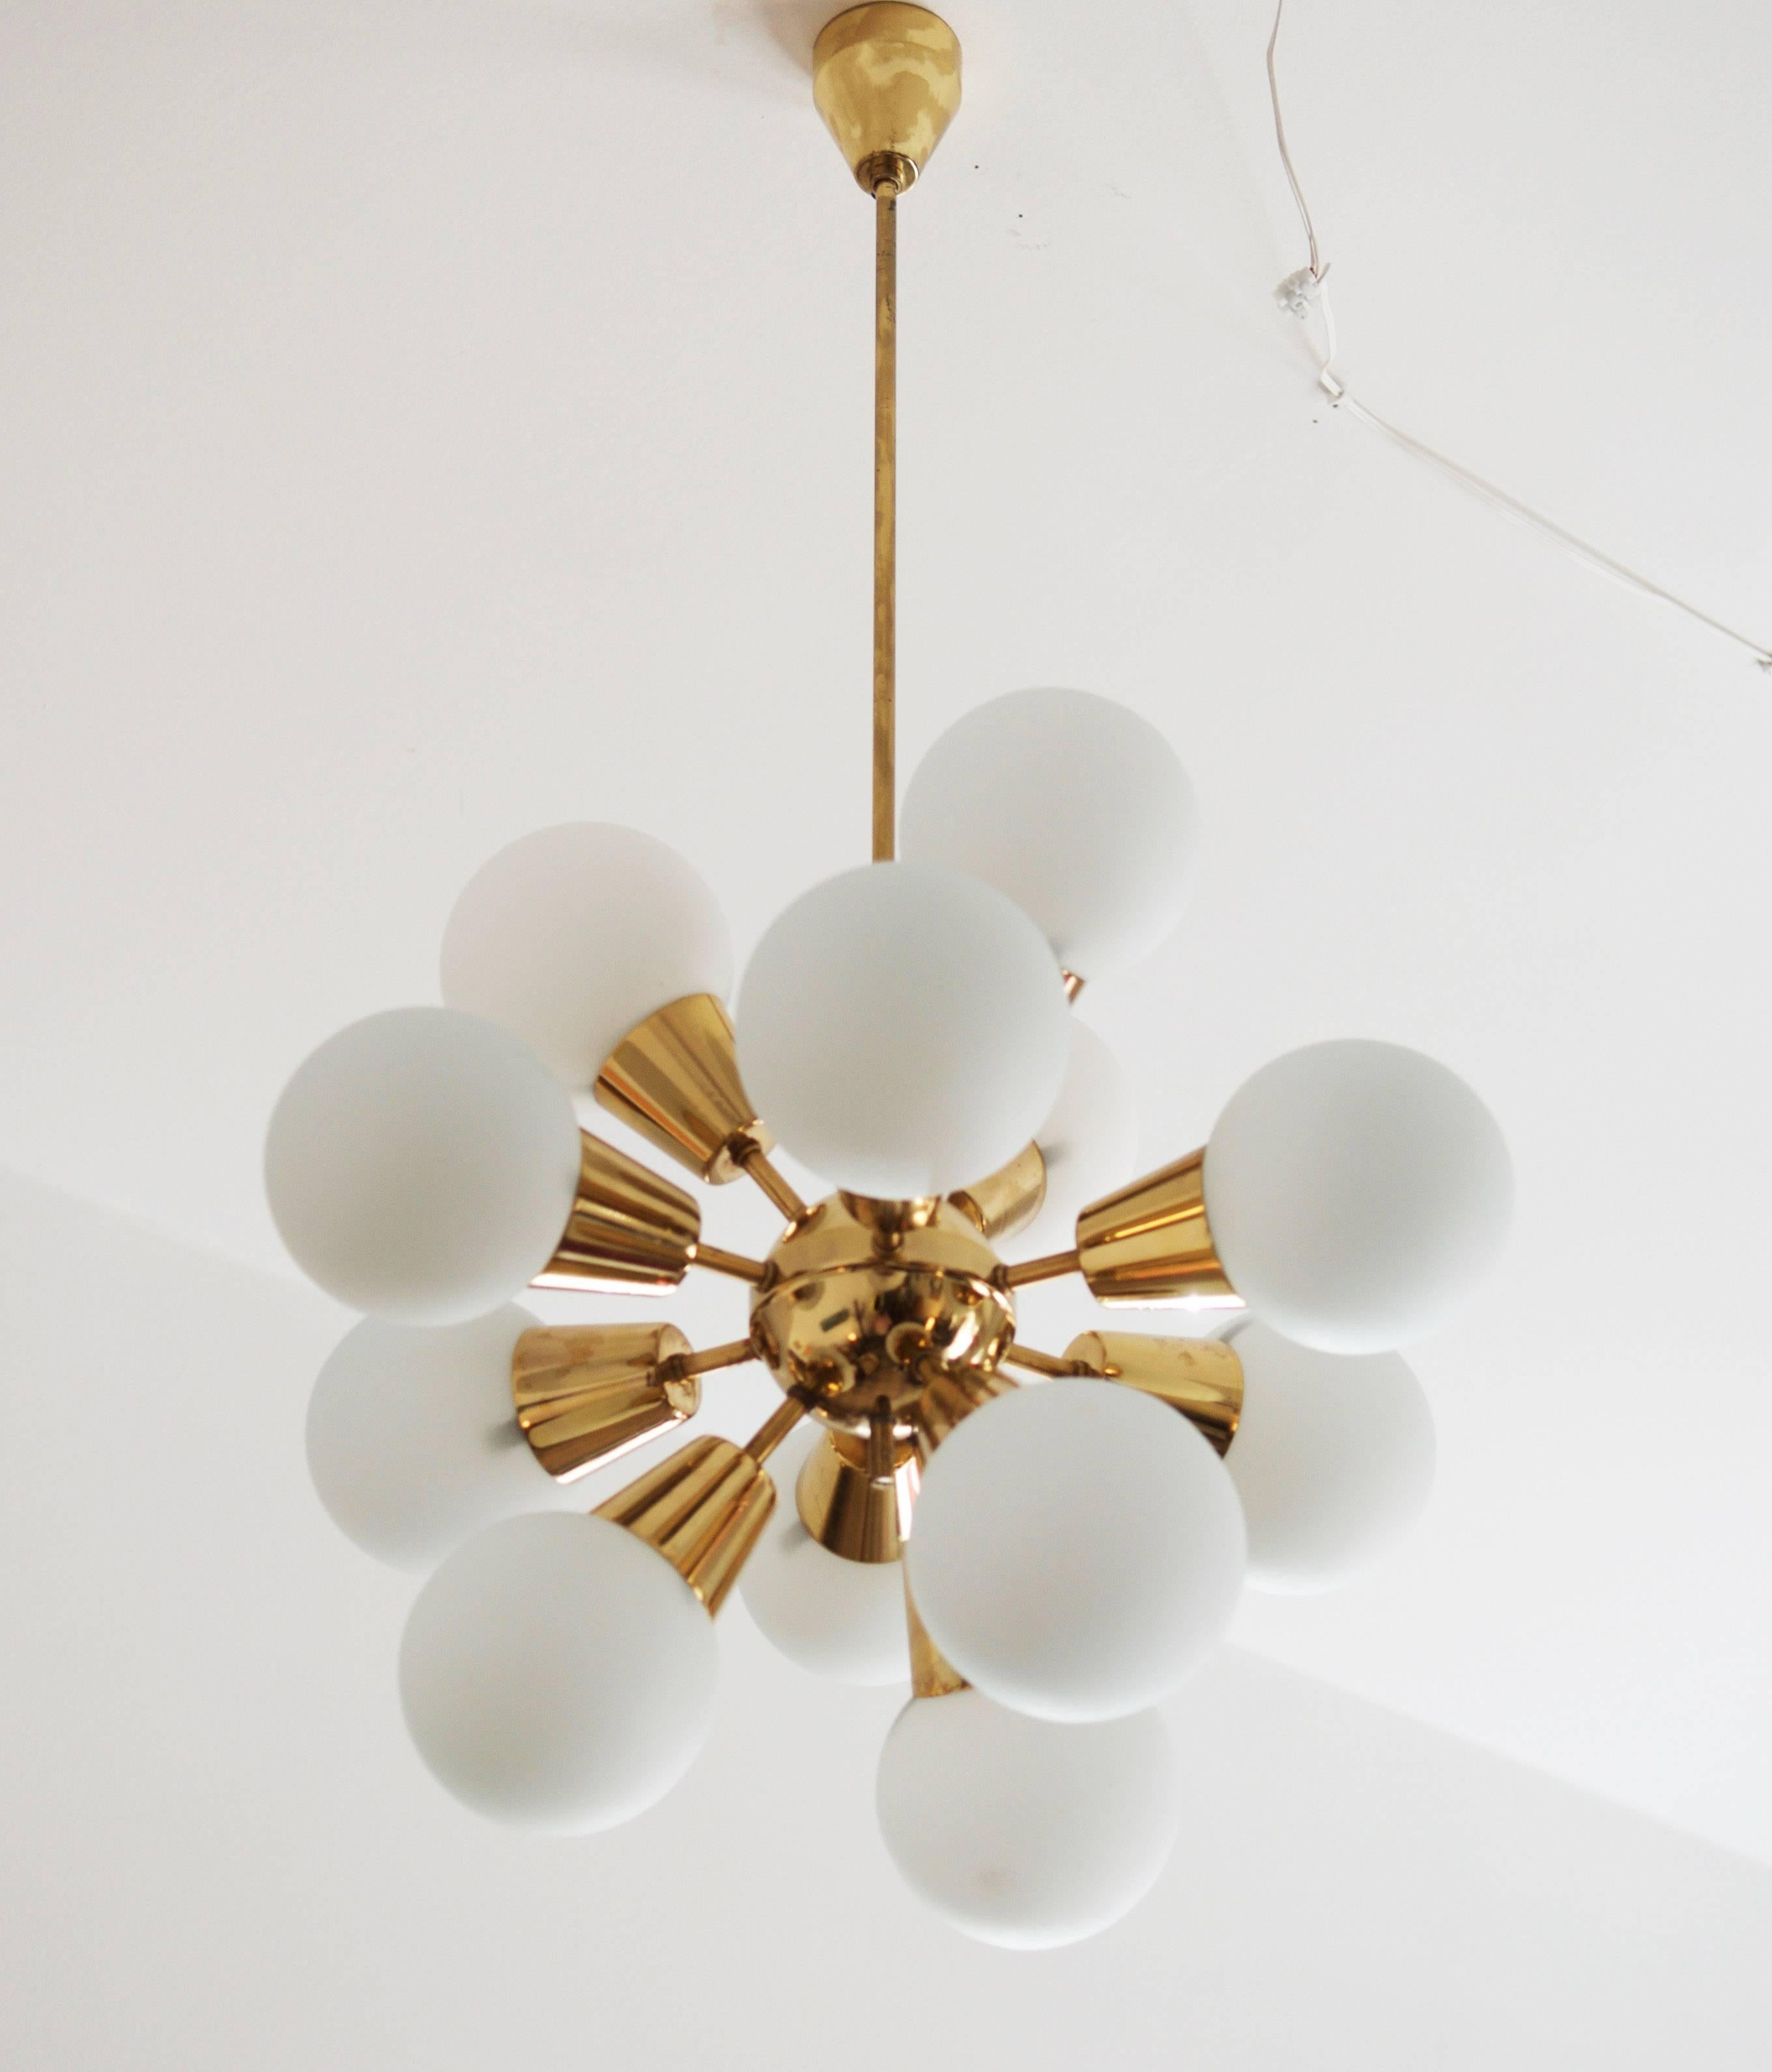 Brass construction with 12 opaline glass shades fitted with E14 bulbs. Made in the 1970s.